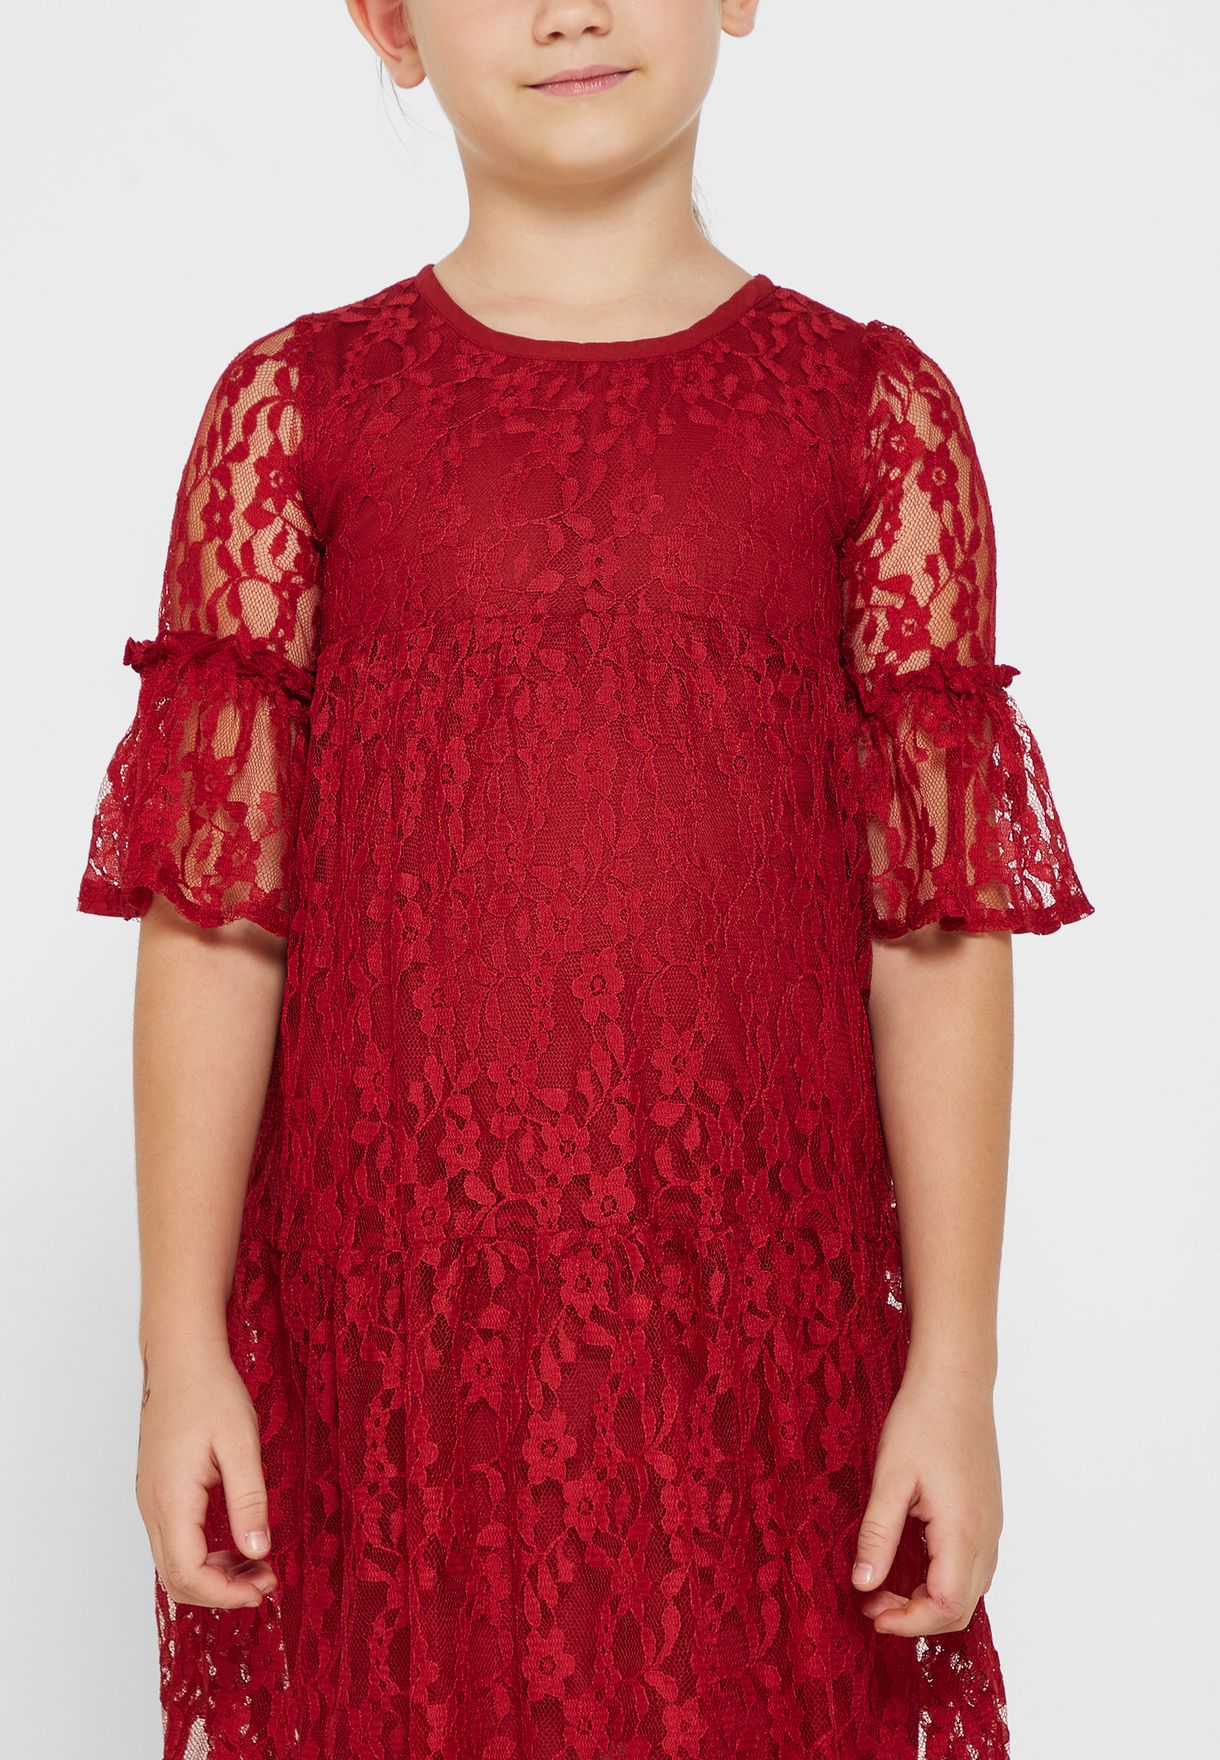 Bell Sleeves Lace Dress